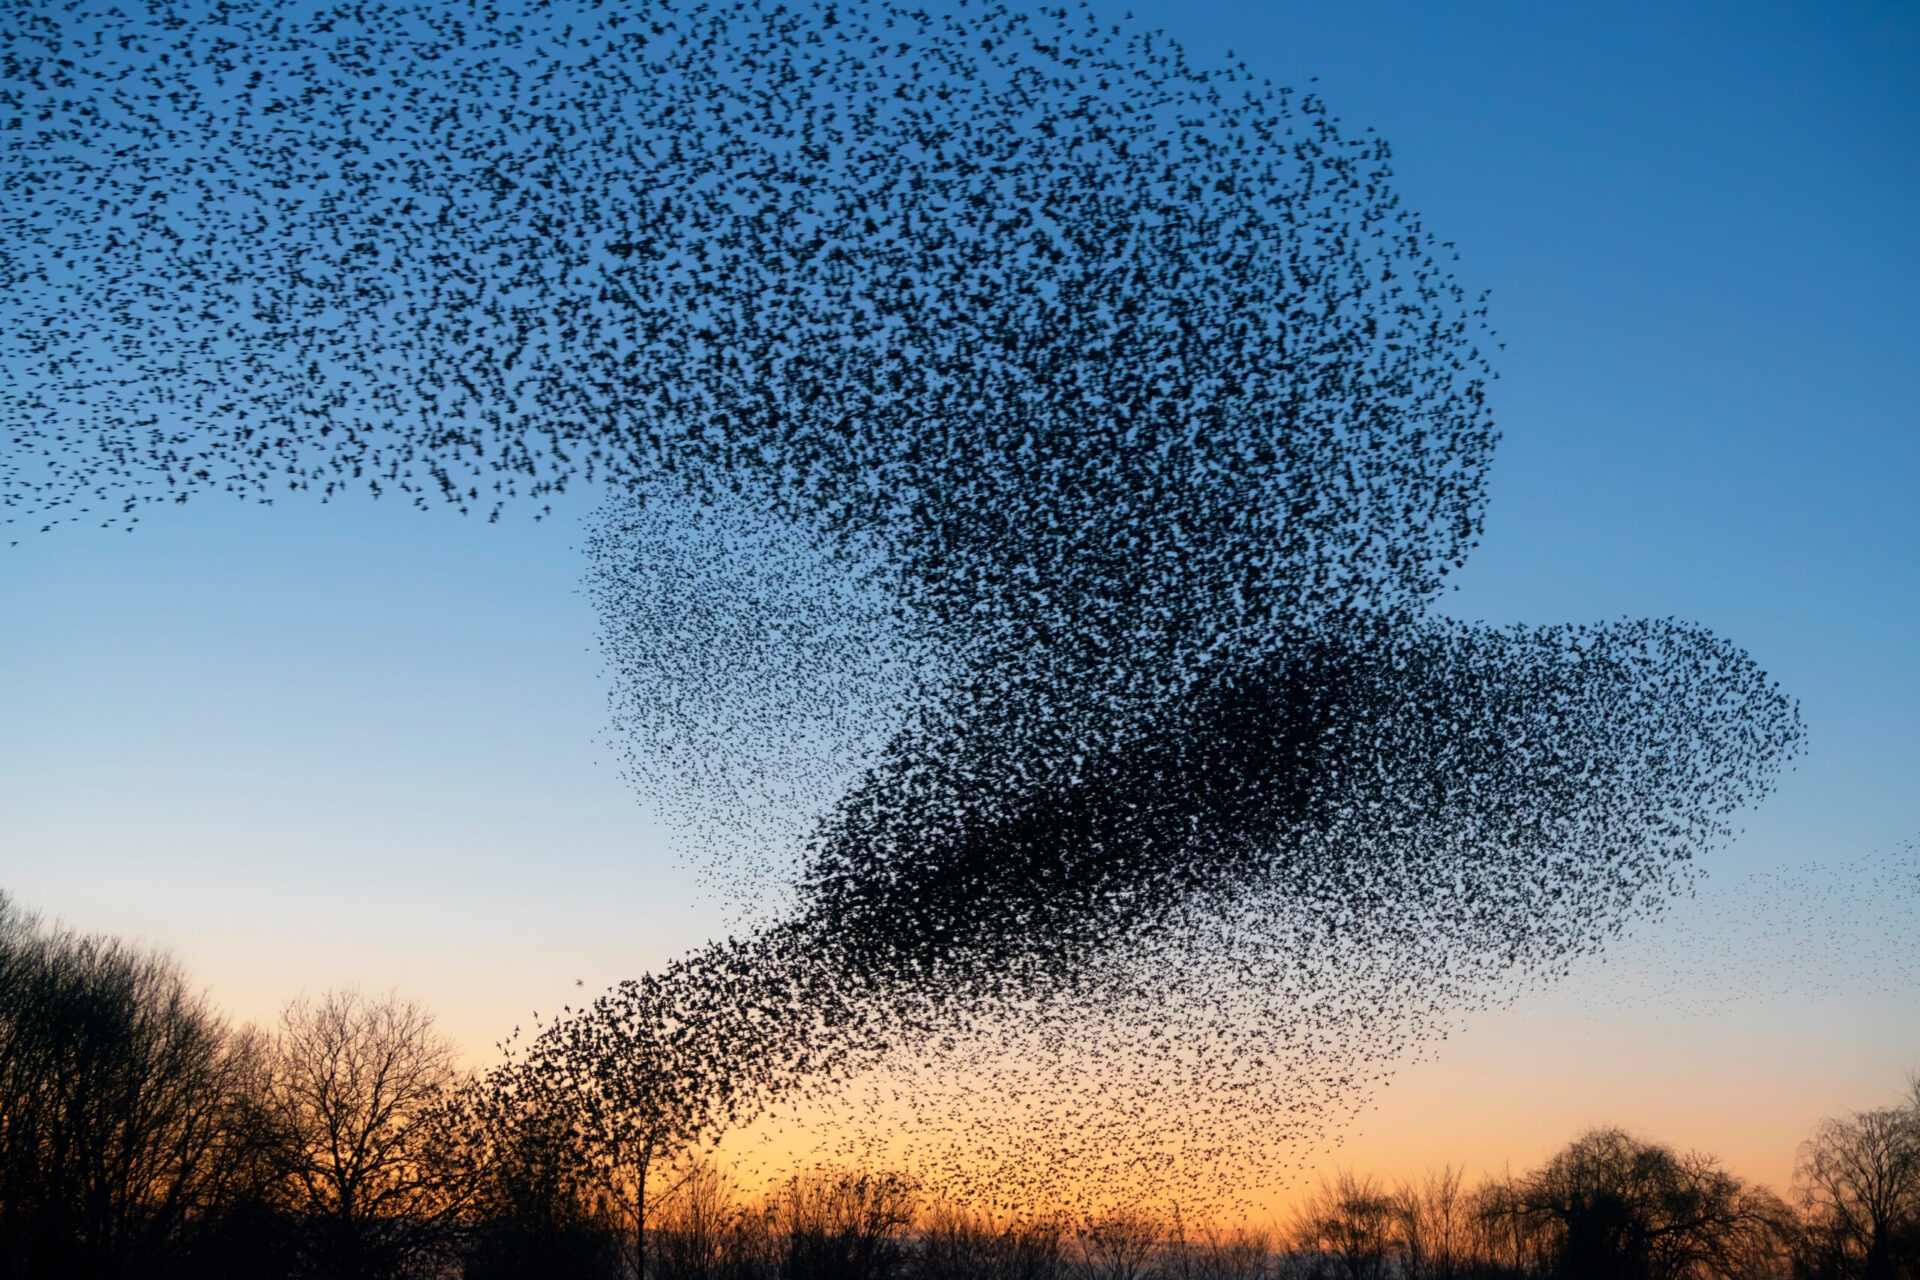 Starlings resembling complexity theory